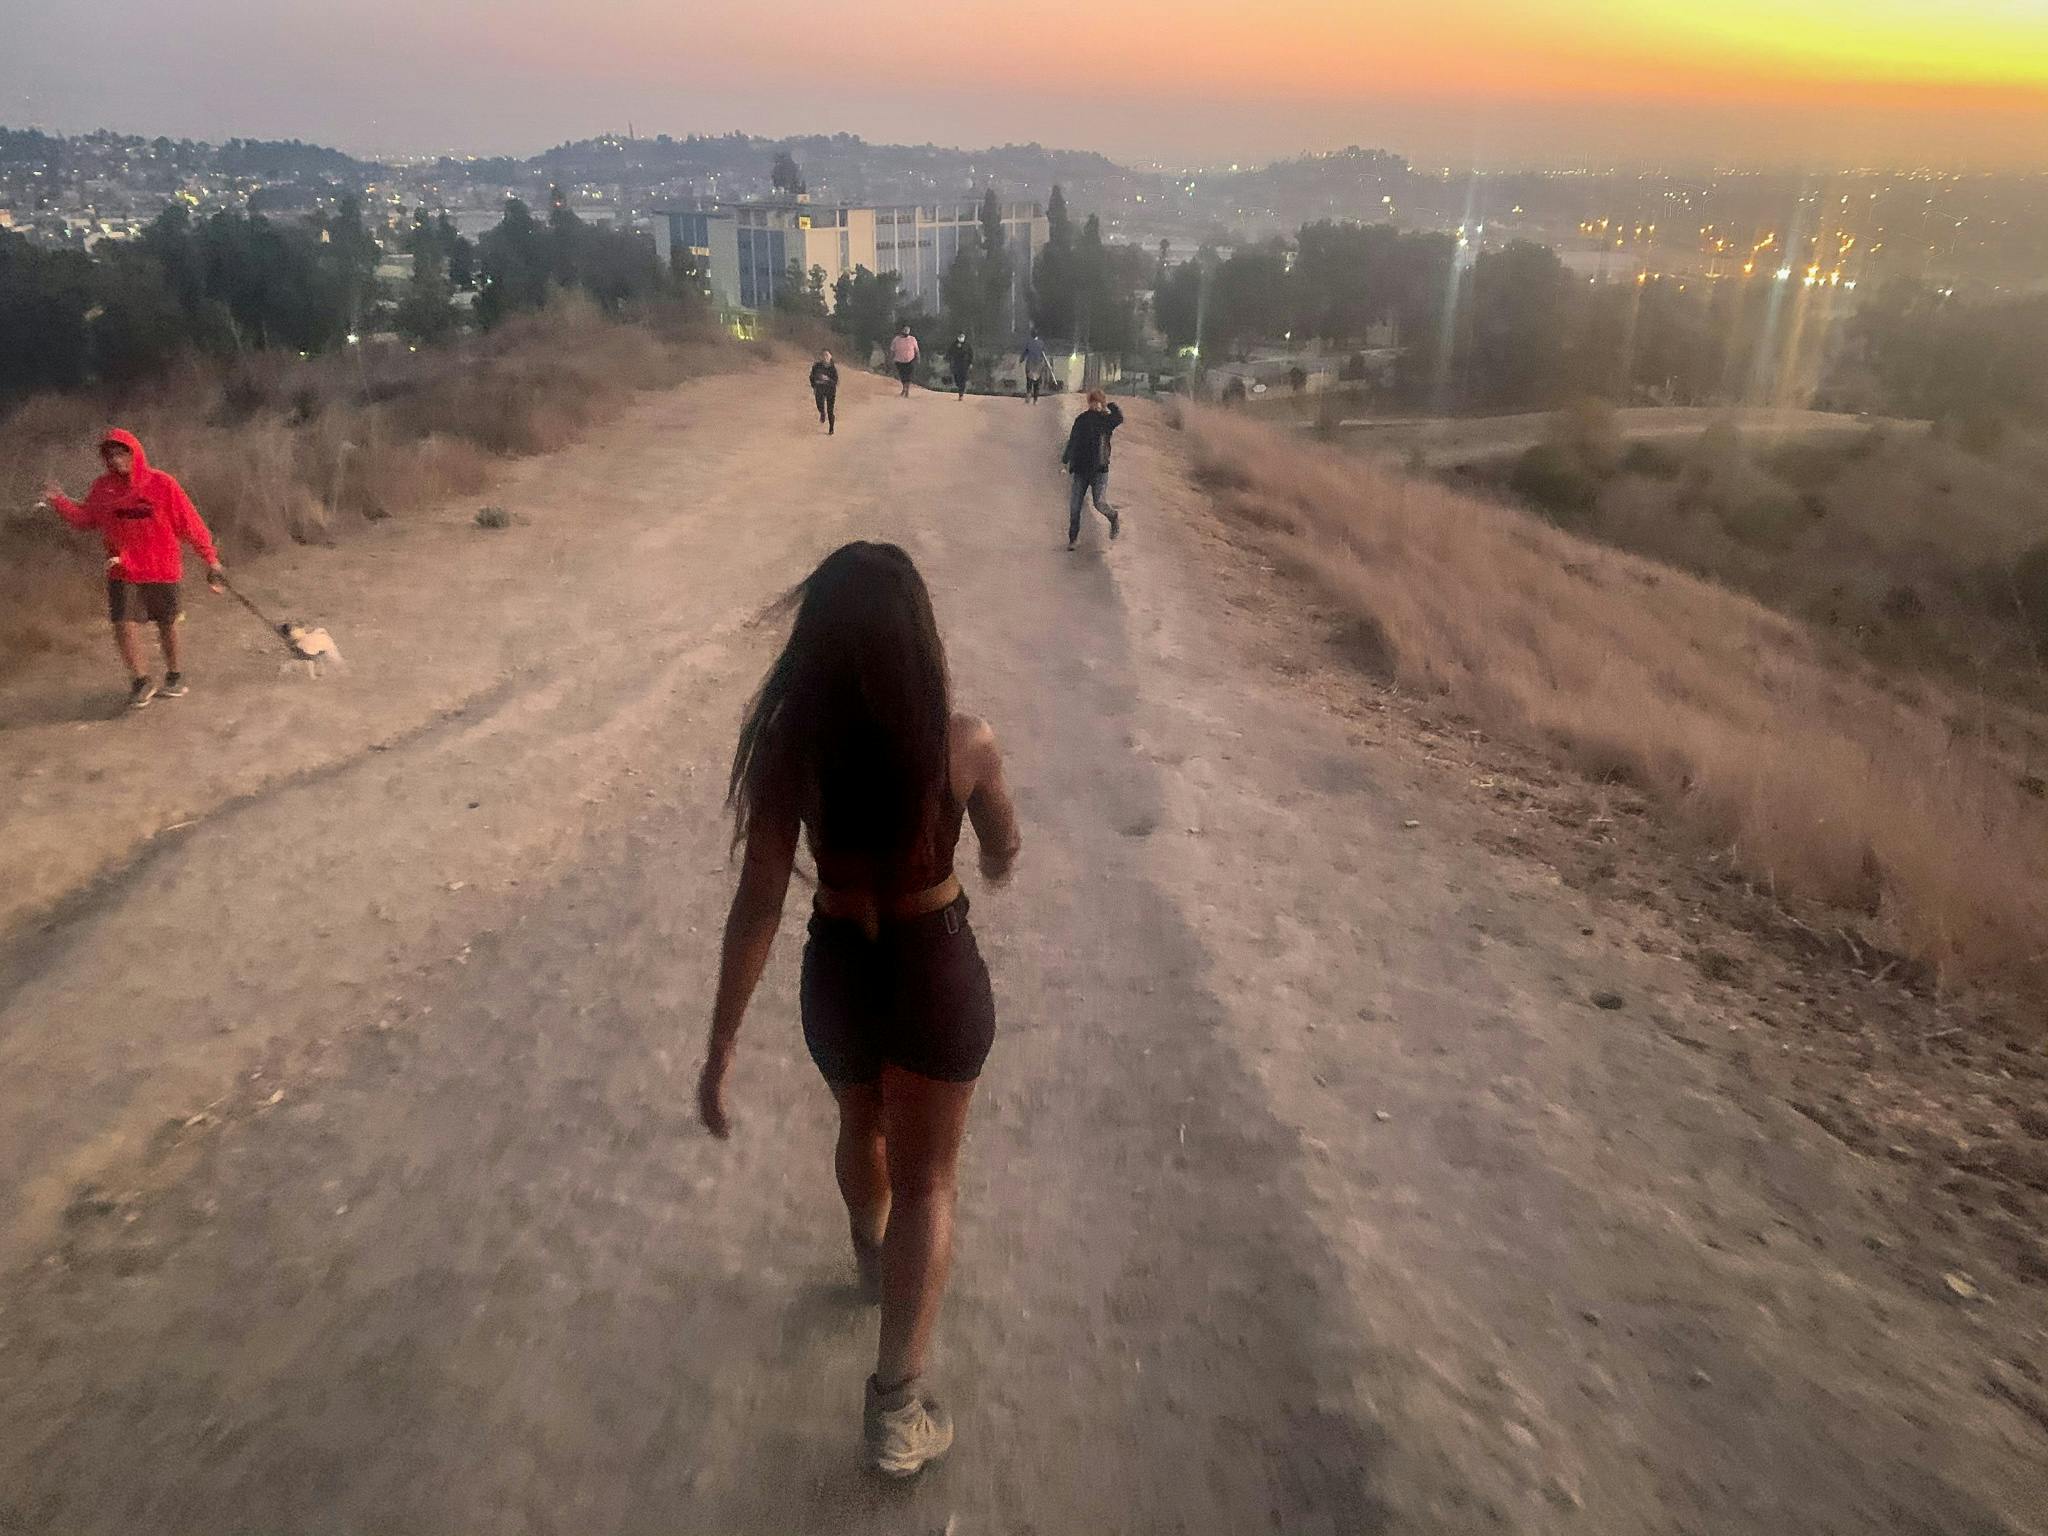 Sunset hike at Ascot Hills in Los Angeles 